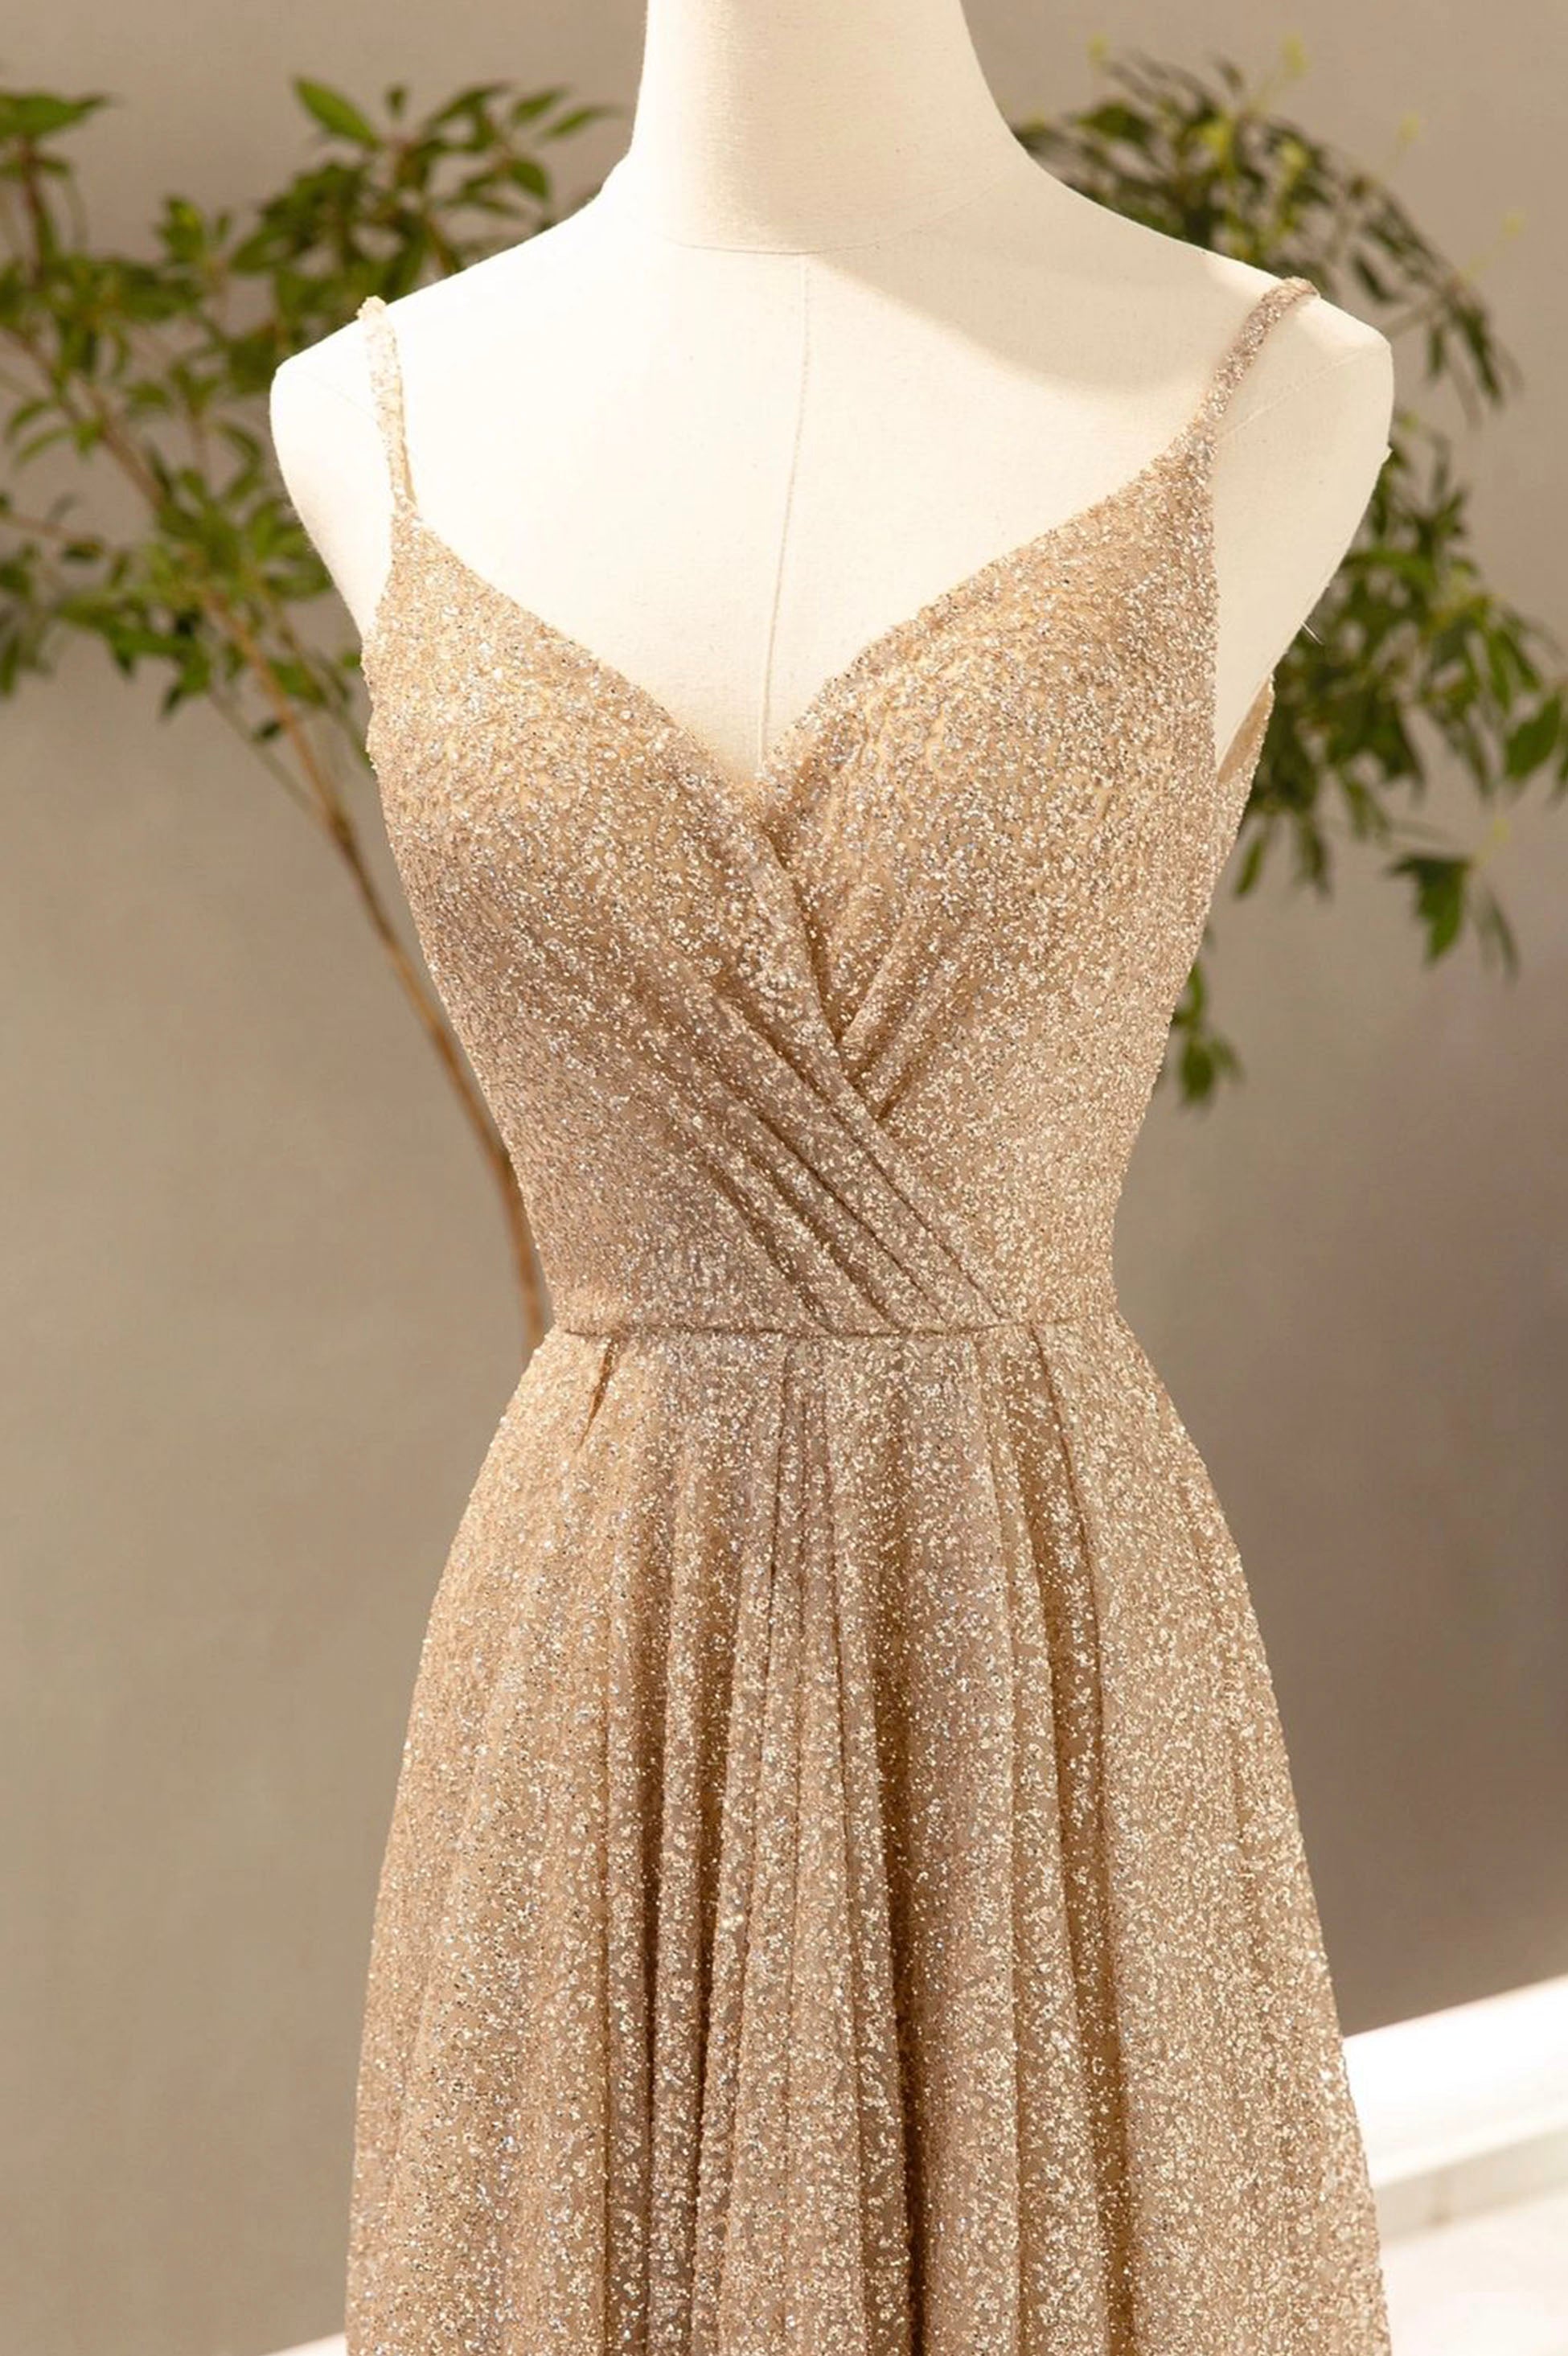 Stylish Outfit, Gold V-Neck Sequins Long Prom Dress, Shiny A-Line Evening Formal Dress